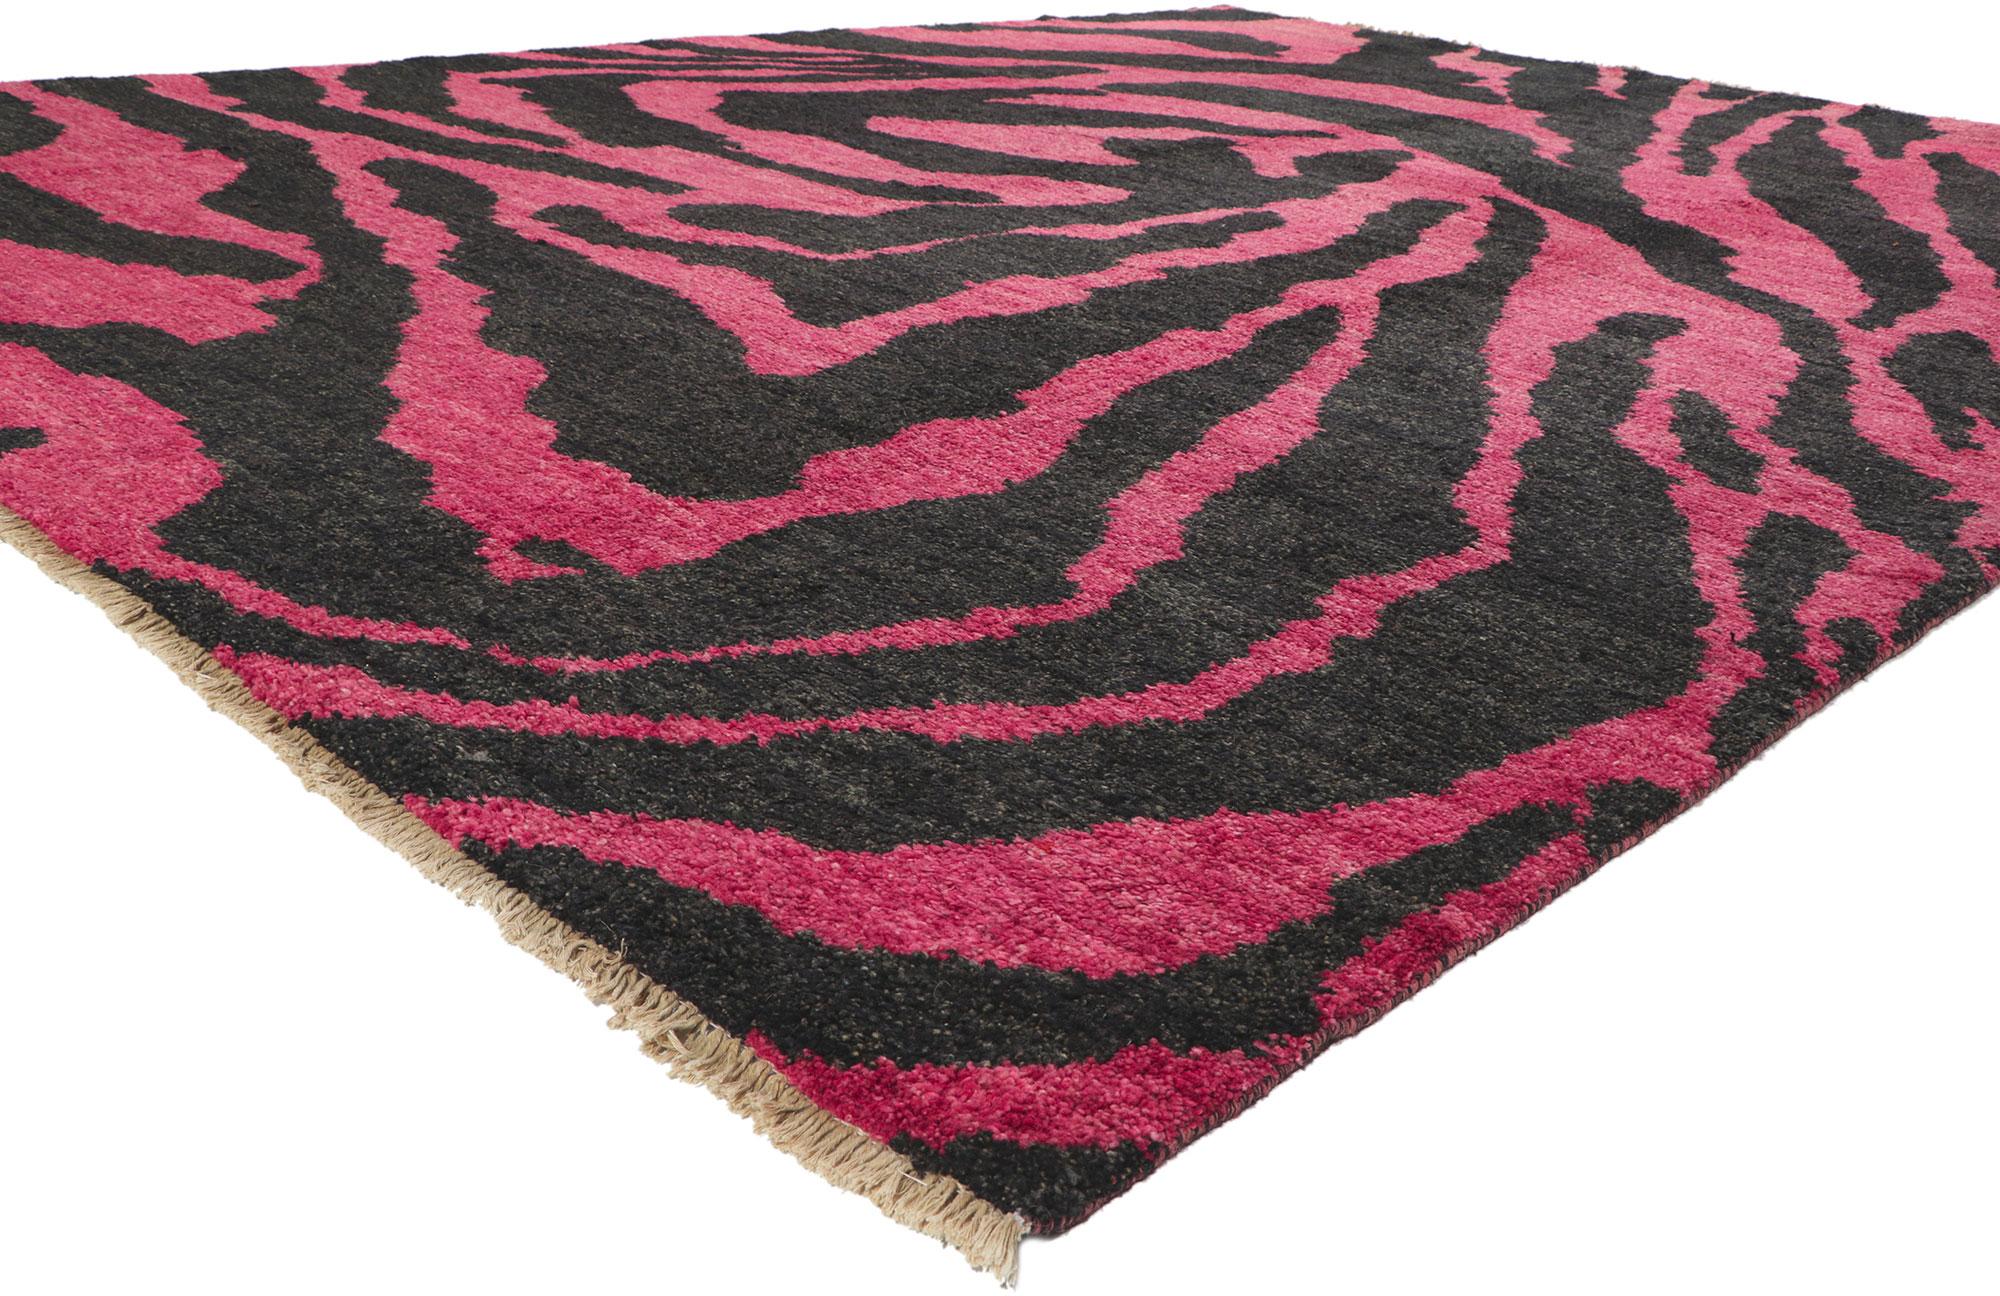 80369 New Abstract Moroccan Area Rug, 10'06 x 13'10. Emanating abstract biomorphic design with incredible detail and texture, this Moroccan area rug is a captivating vision of woven beauty. The zebra pattern and bold colorway woven into this piece